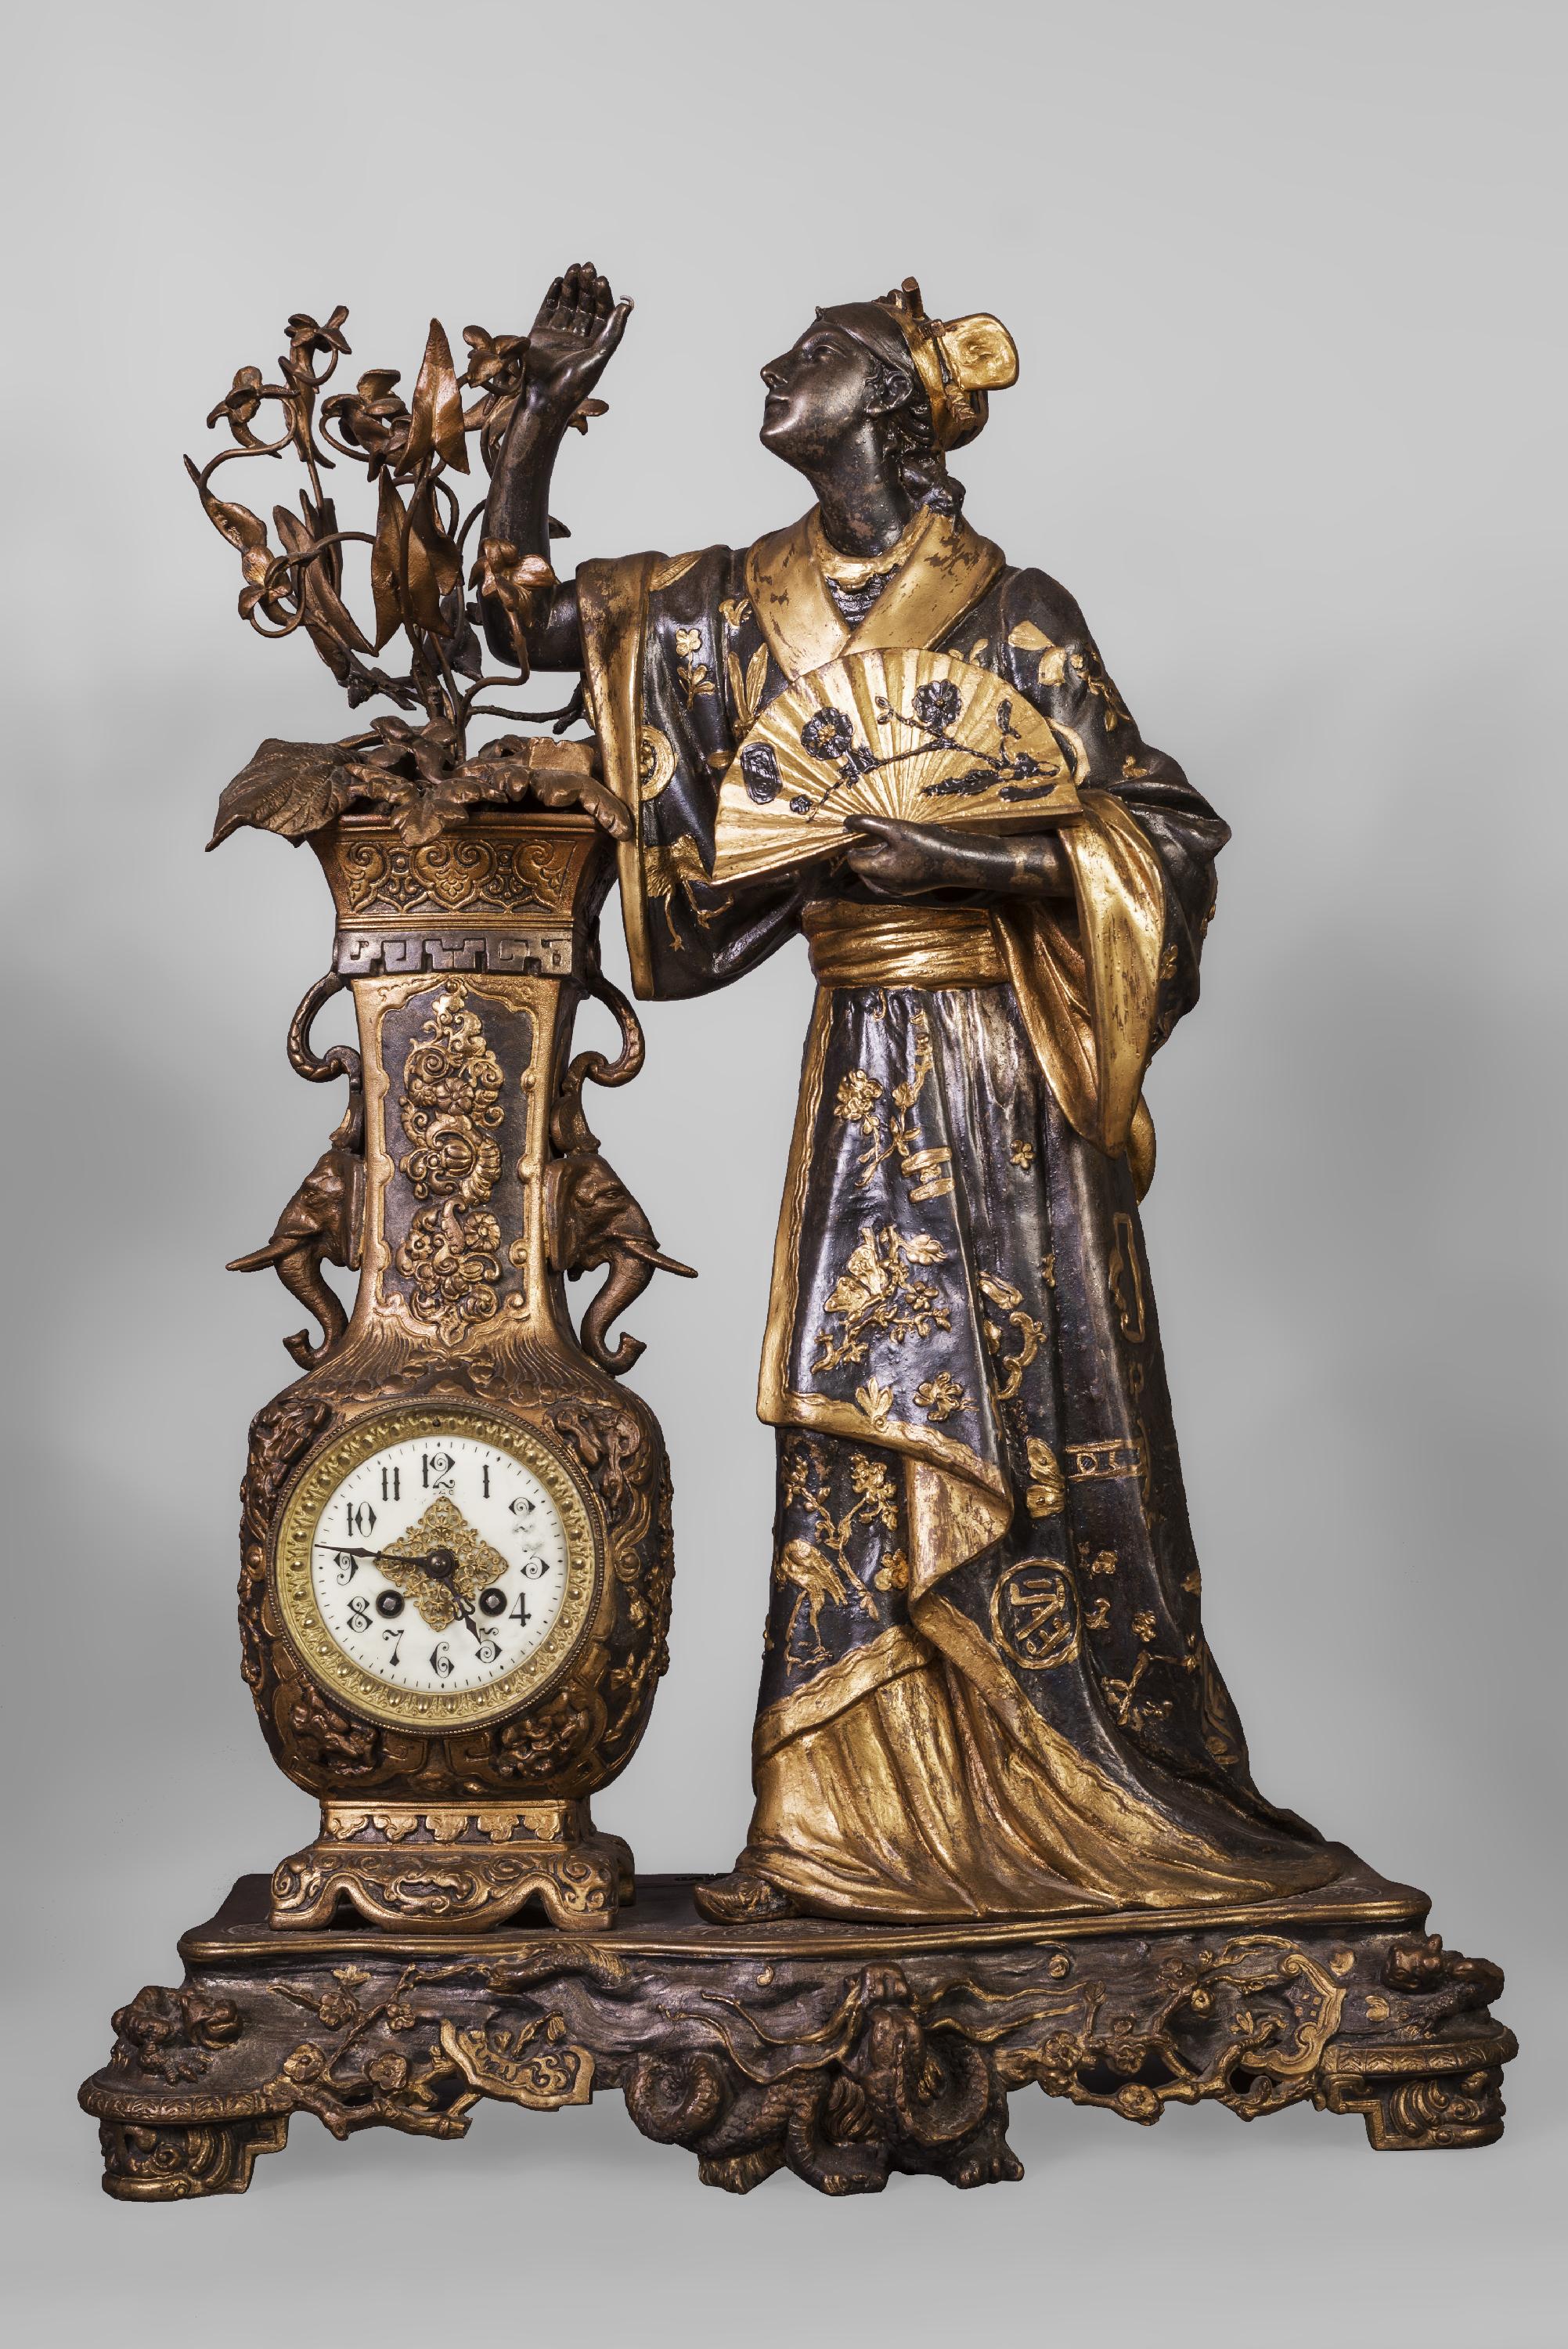 By Arthur WAAGEN (active 1869-1910).
Japanese-style clock set. Made out of spelter. 
Representing a young woman dressed in a kimono